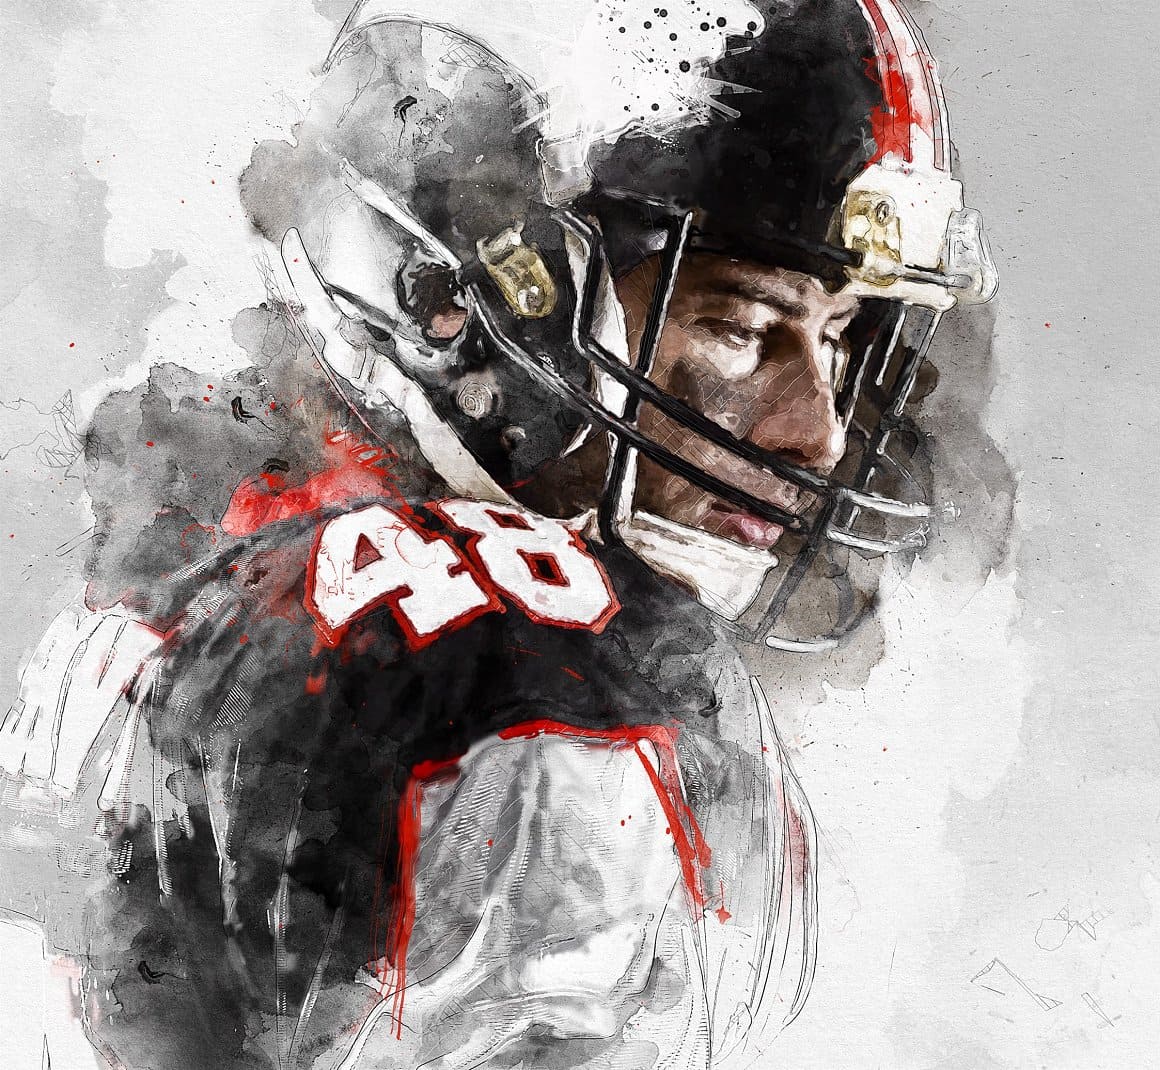 The image of the athlete performing under number 48 is painted with watercolors in Photoshop.